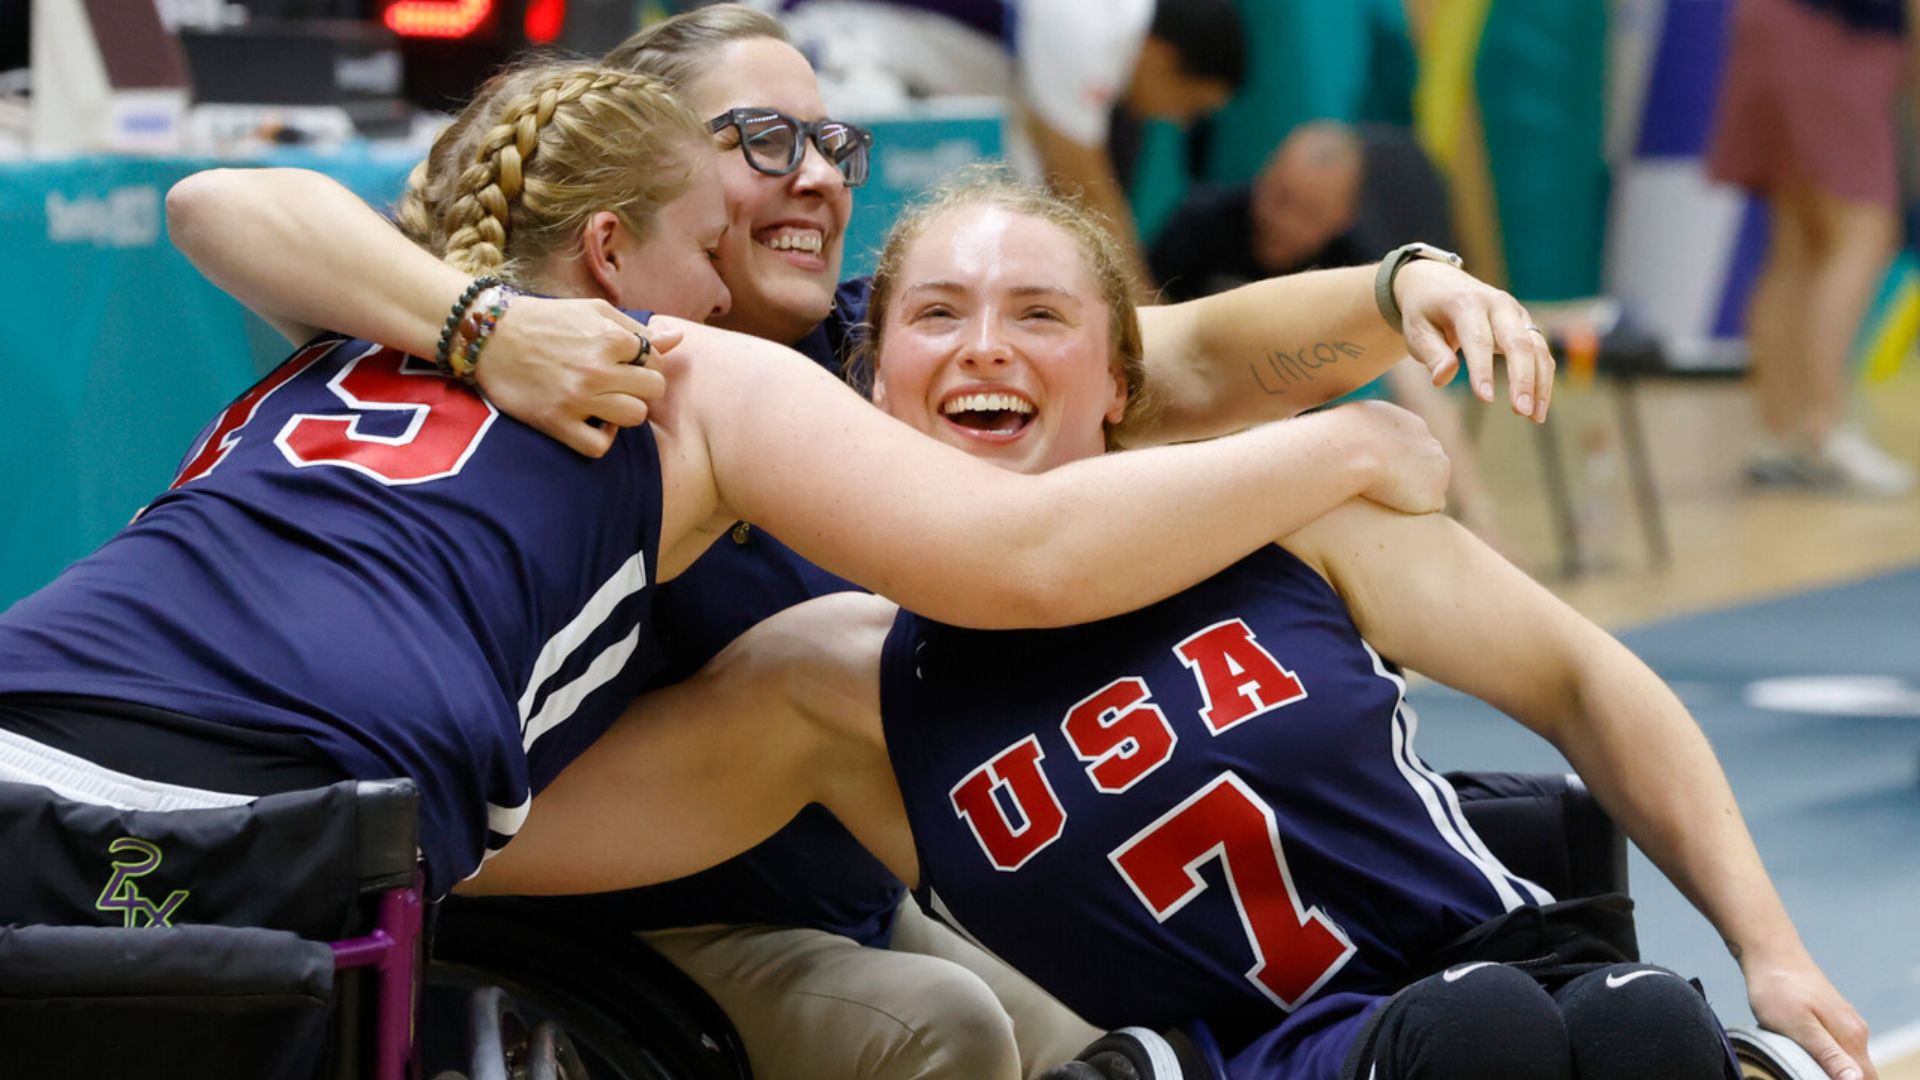 Santiago 2023's Great Moments: USA Dominates in Wheelchair Basketball, Rugby